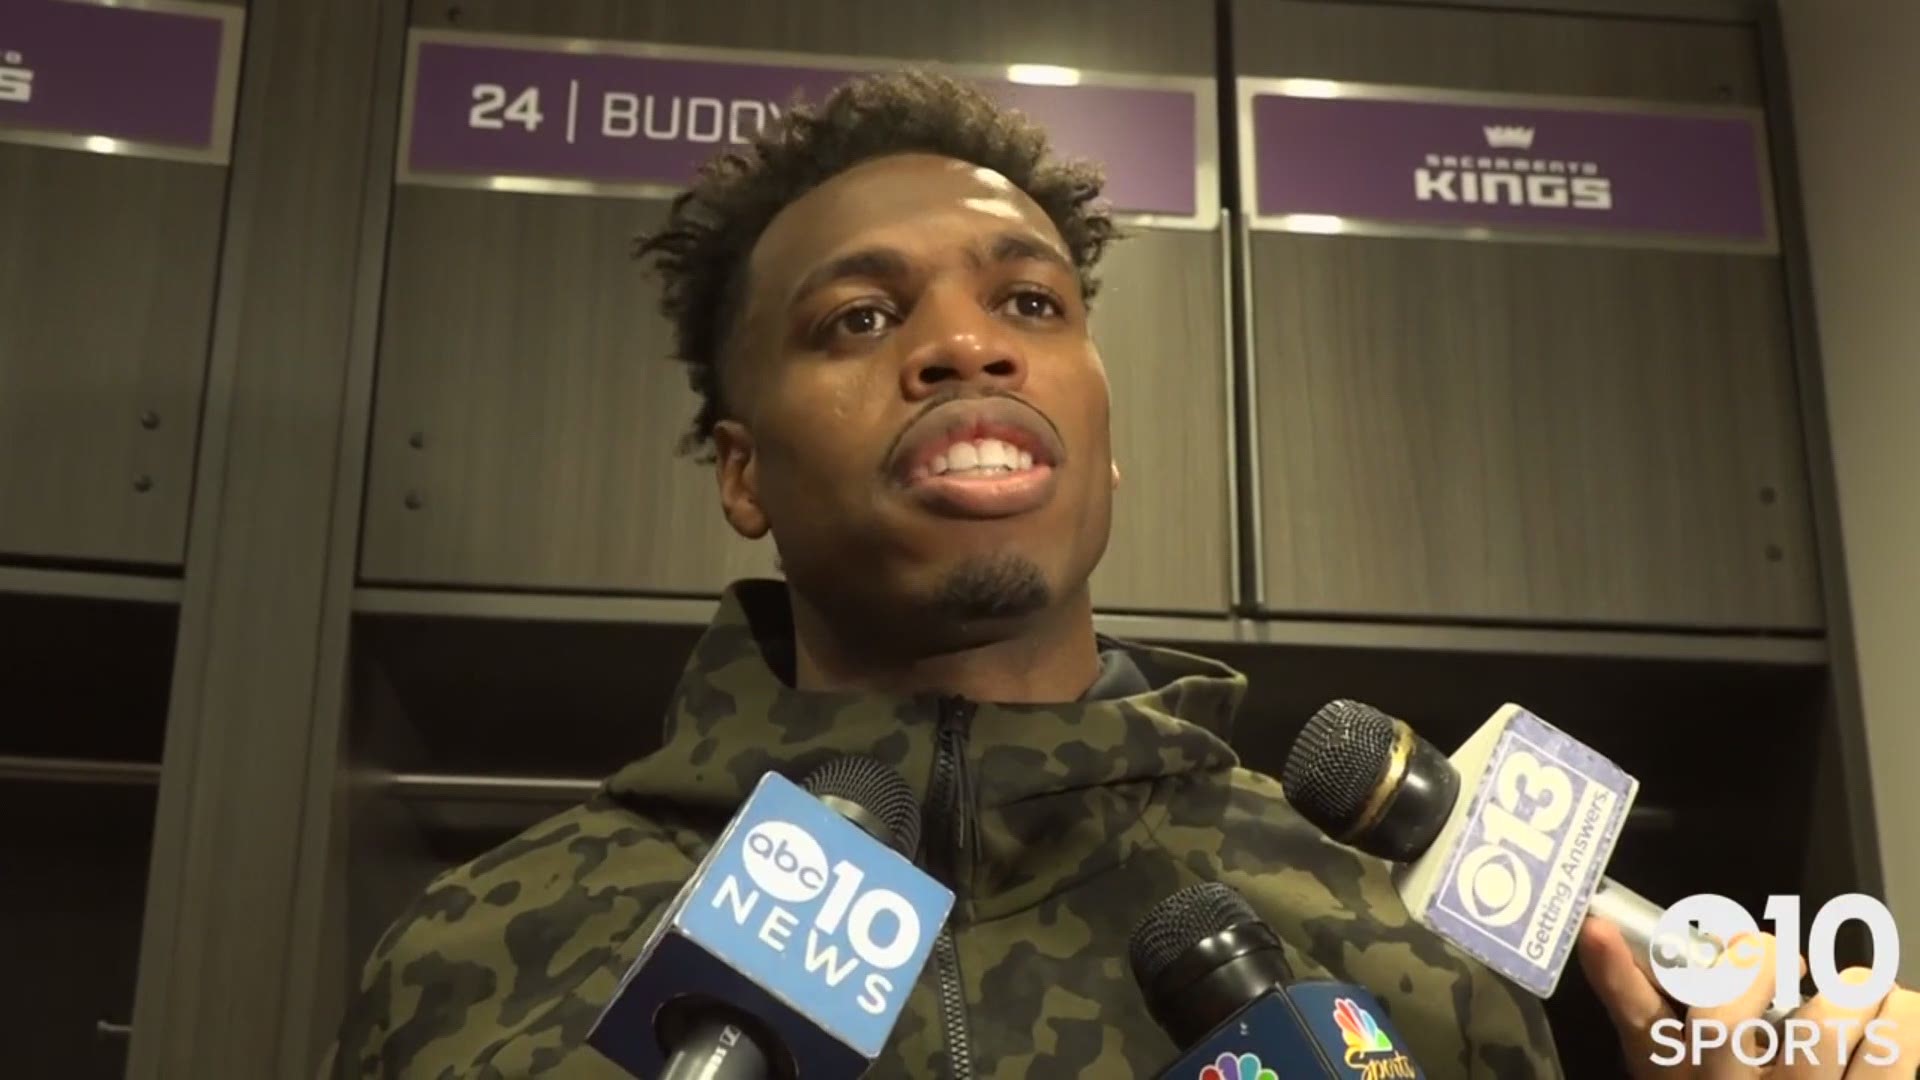 Kings SG Buddy Hield talks about Tuesday's win over the Phoenix Suns, holding off their rally in the second half and career-high performances from teammates